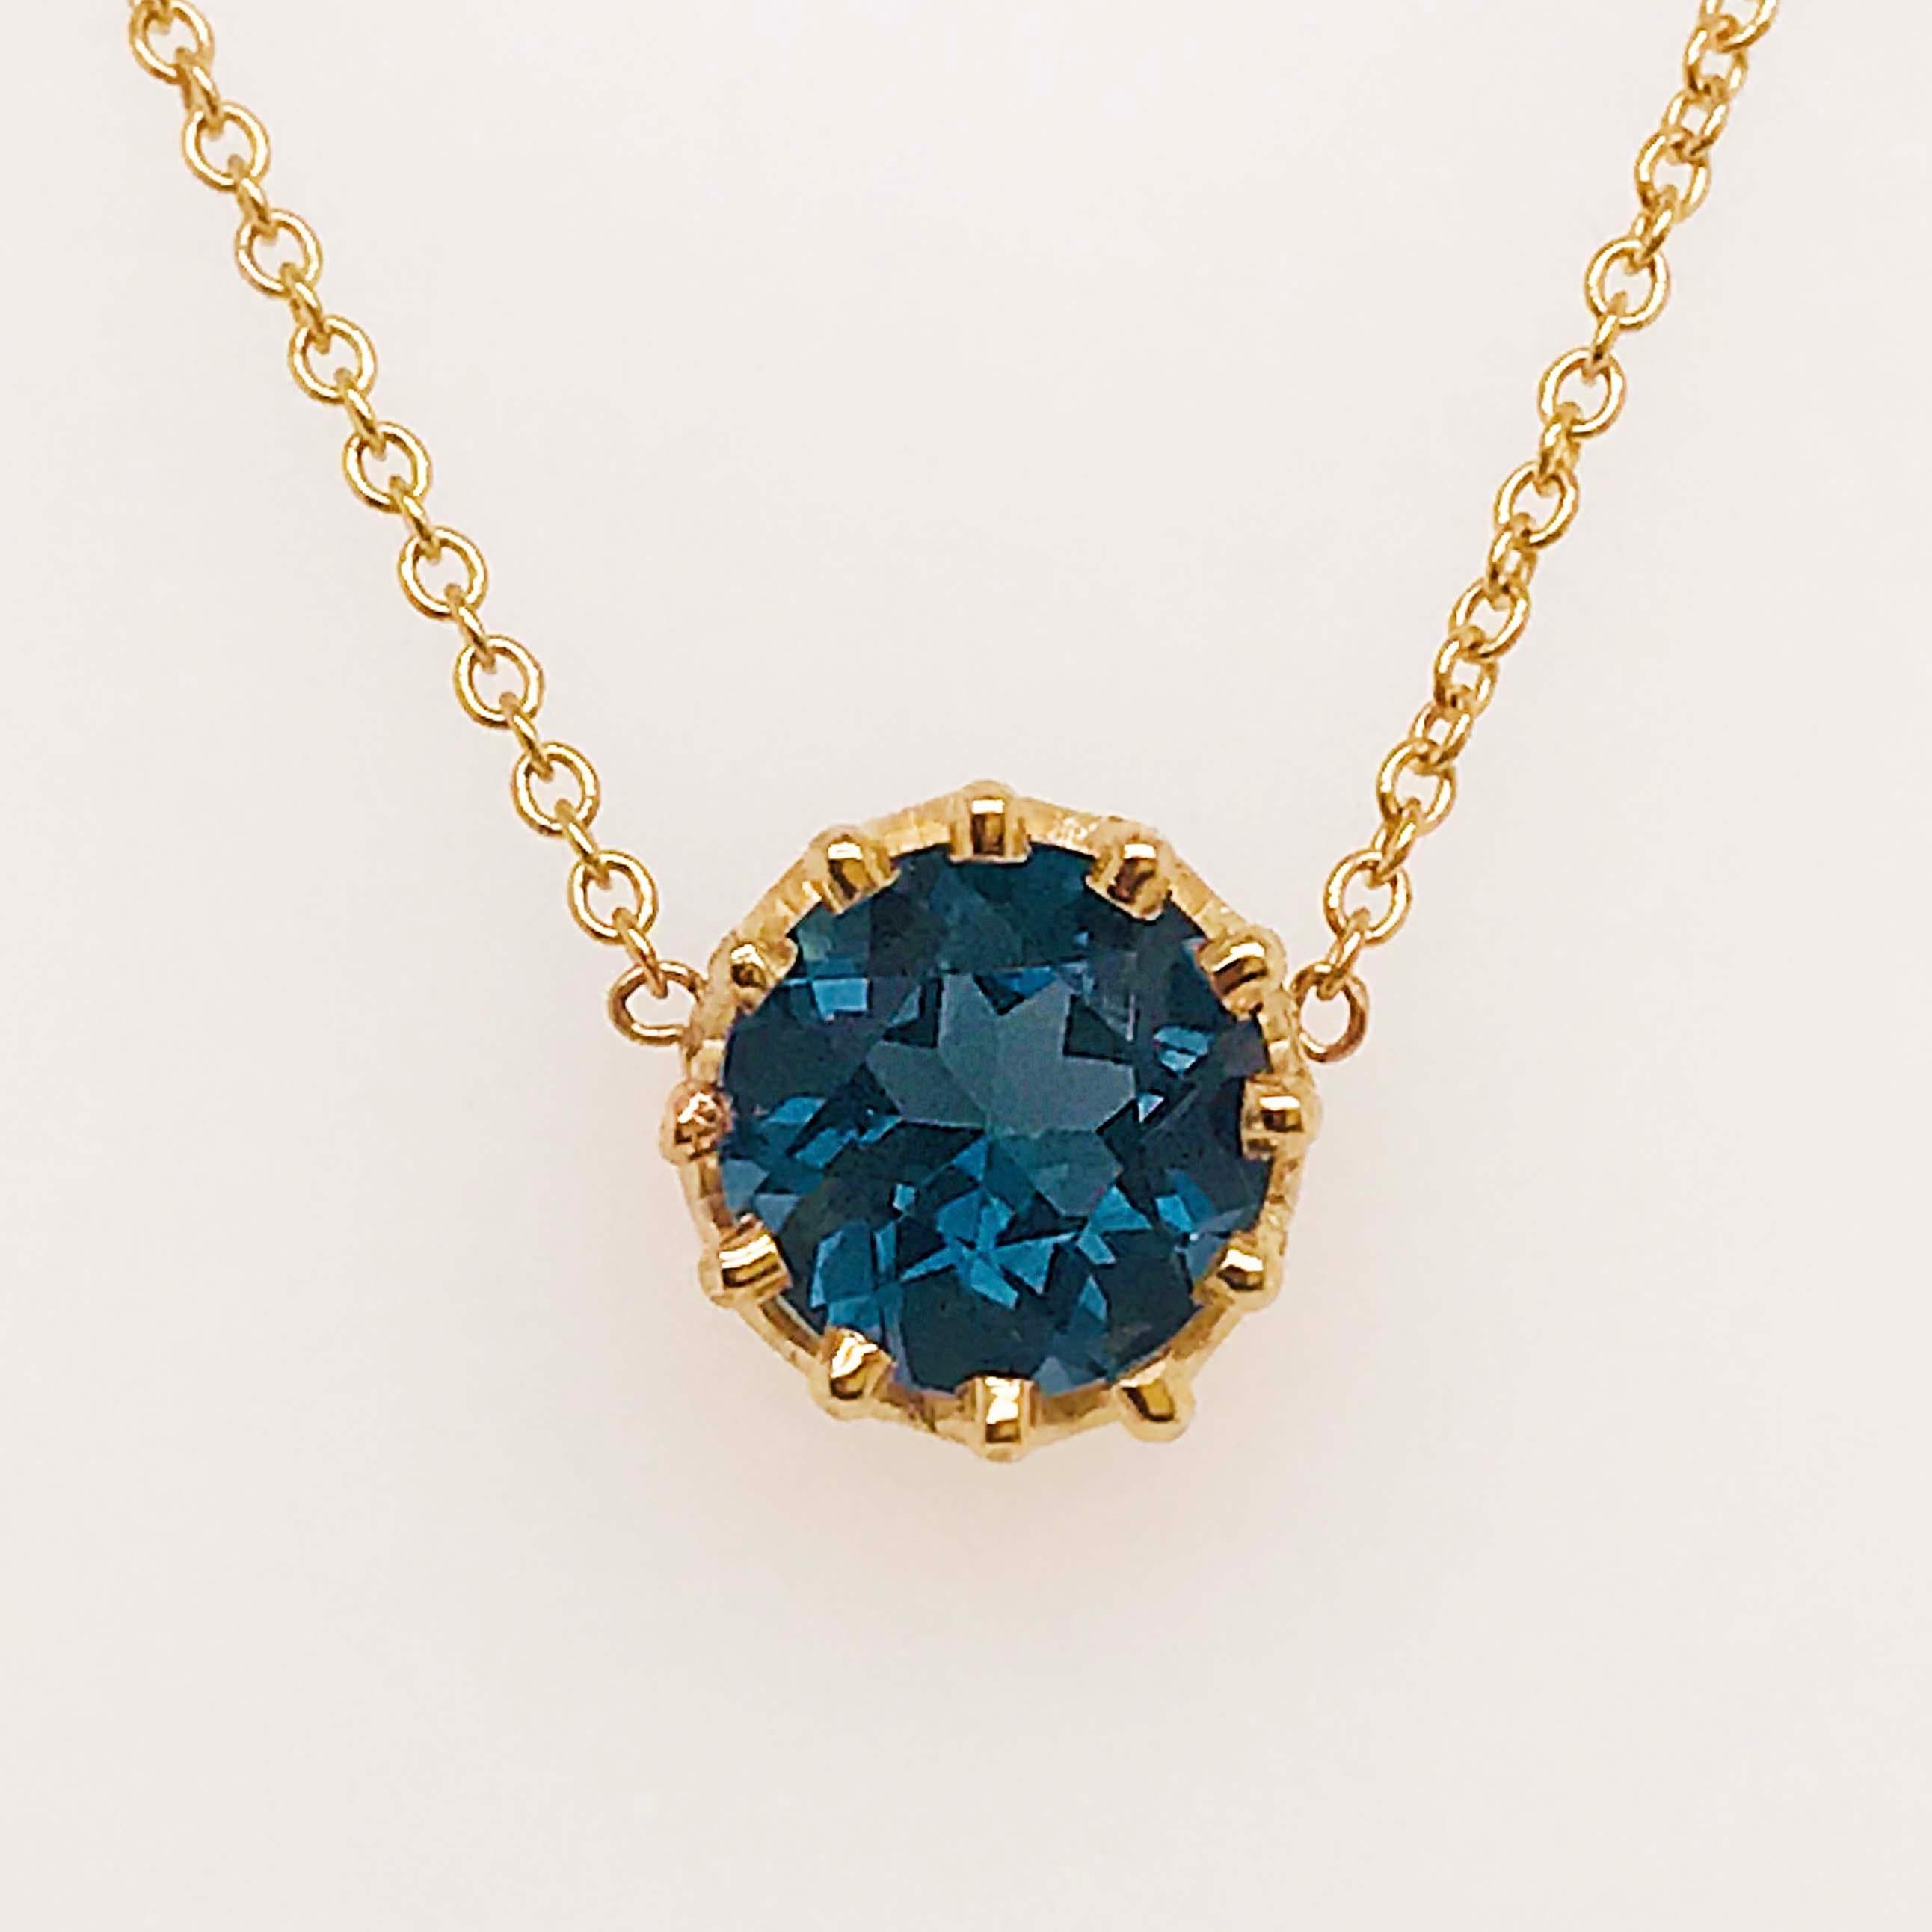 This 1.75 carat London Blue topaz gemstone necklace is a statement piece. With a genuine round London blue topaz gemstone set in the center. The topaz gemstone has been cut in a round faceted shape that radiates brilliance and showcased the gorgeous